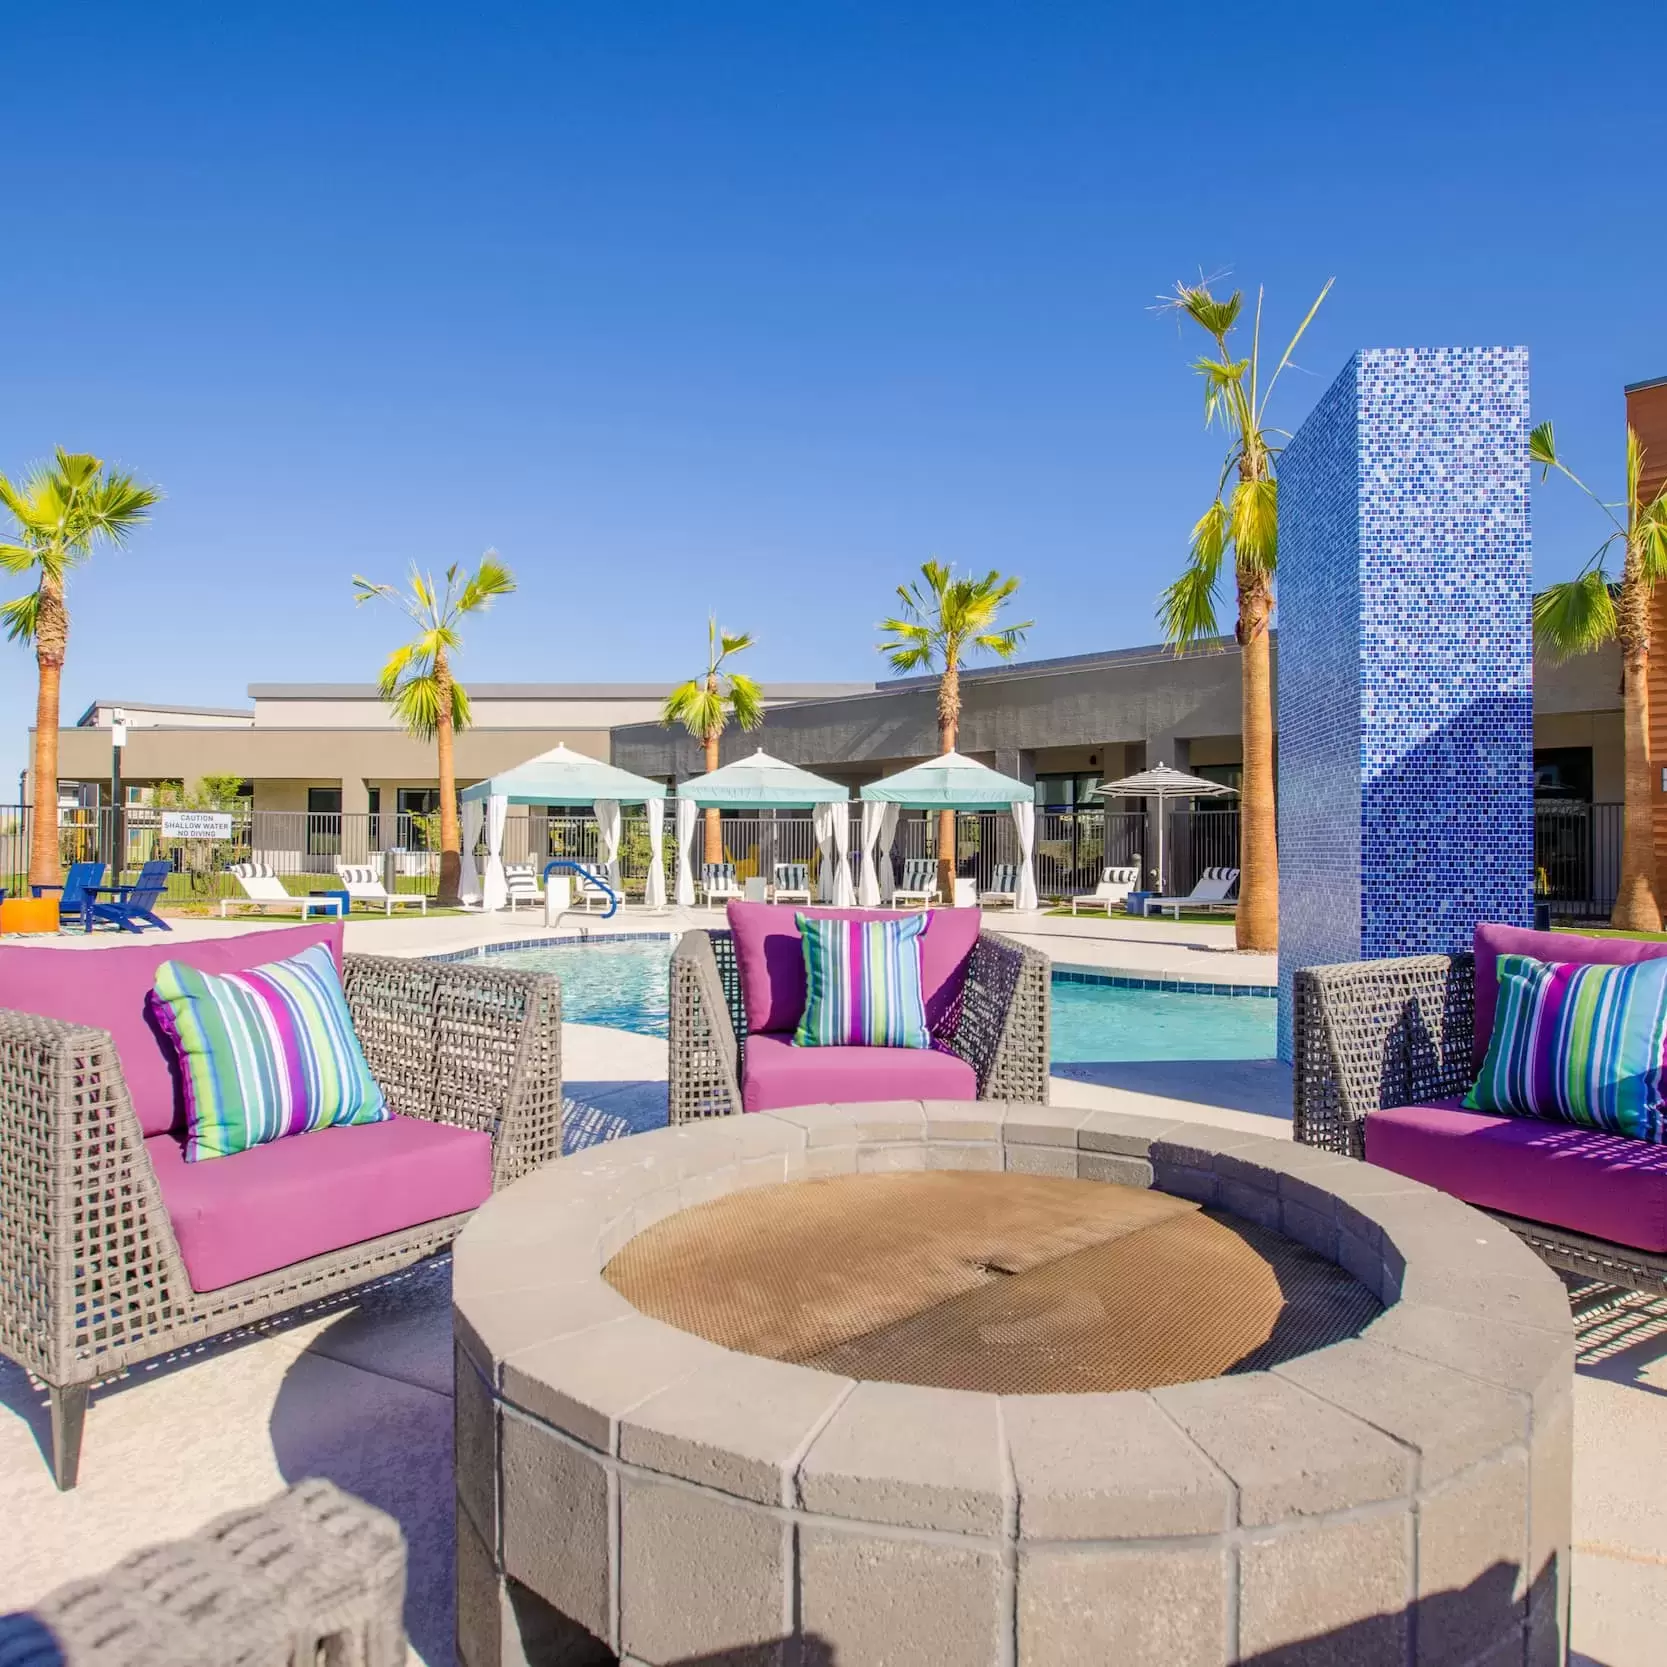 Comfortable chairs surround a firepit on the patio by the pool.